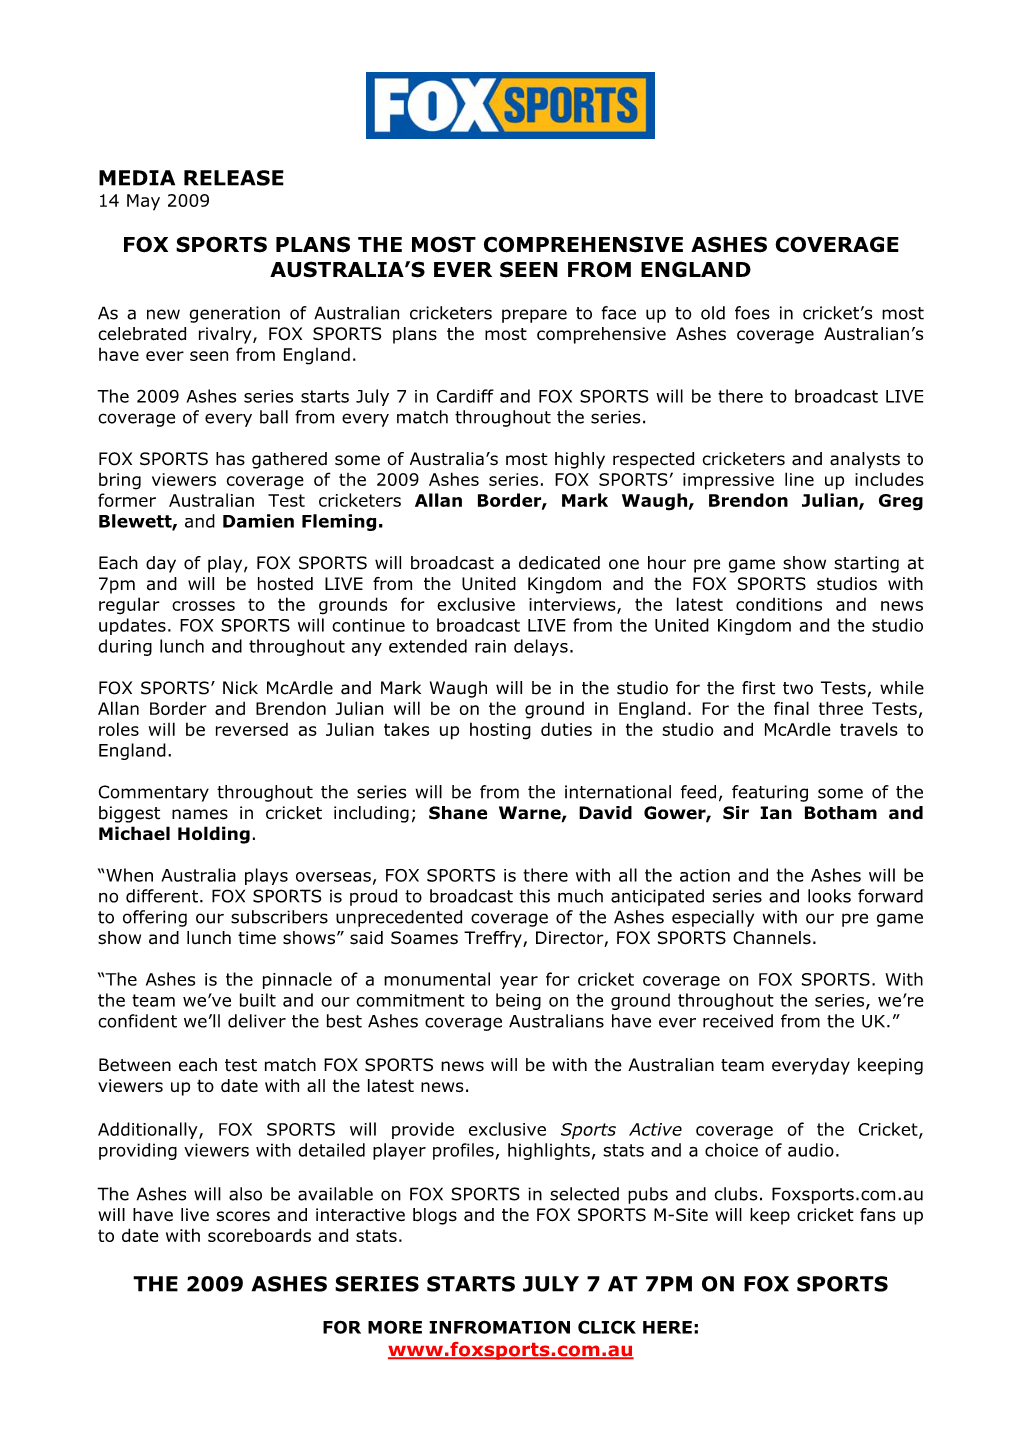 Media Release Fox Sports Plans the Most Comprehensive Ashes Coverage Australia's Ever Seen from England the 2009 Ashes Series